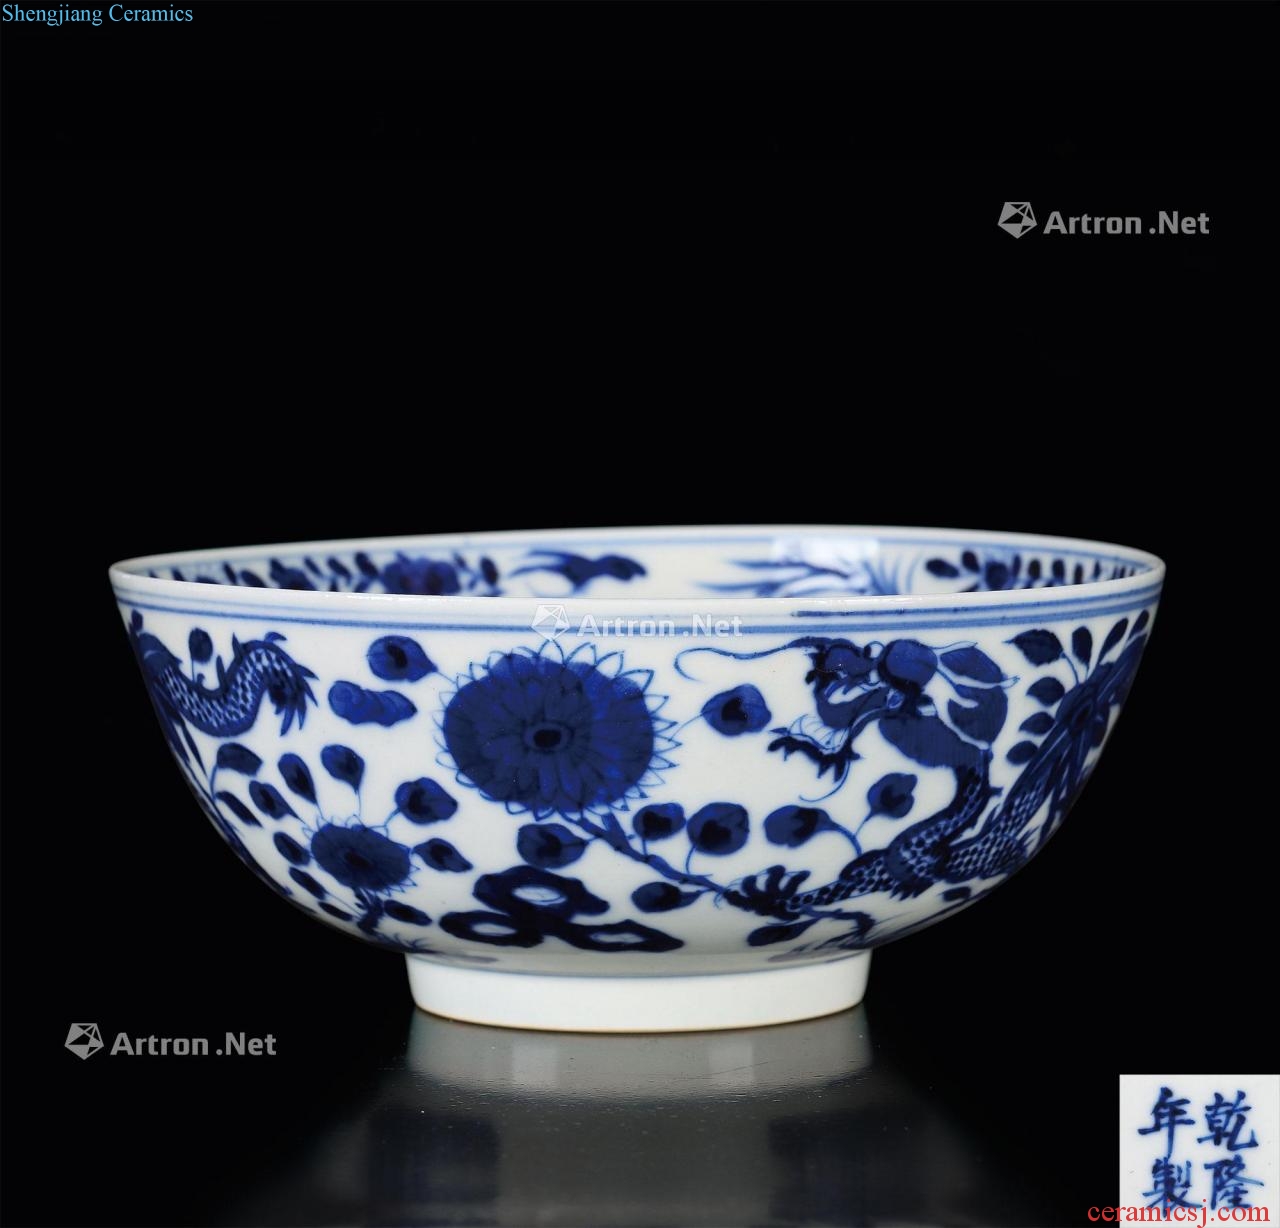 In the qing dynasty Blue and white dragon bowl